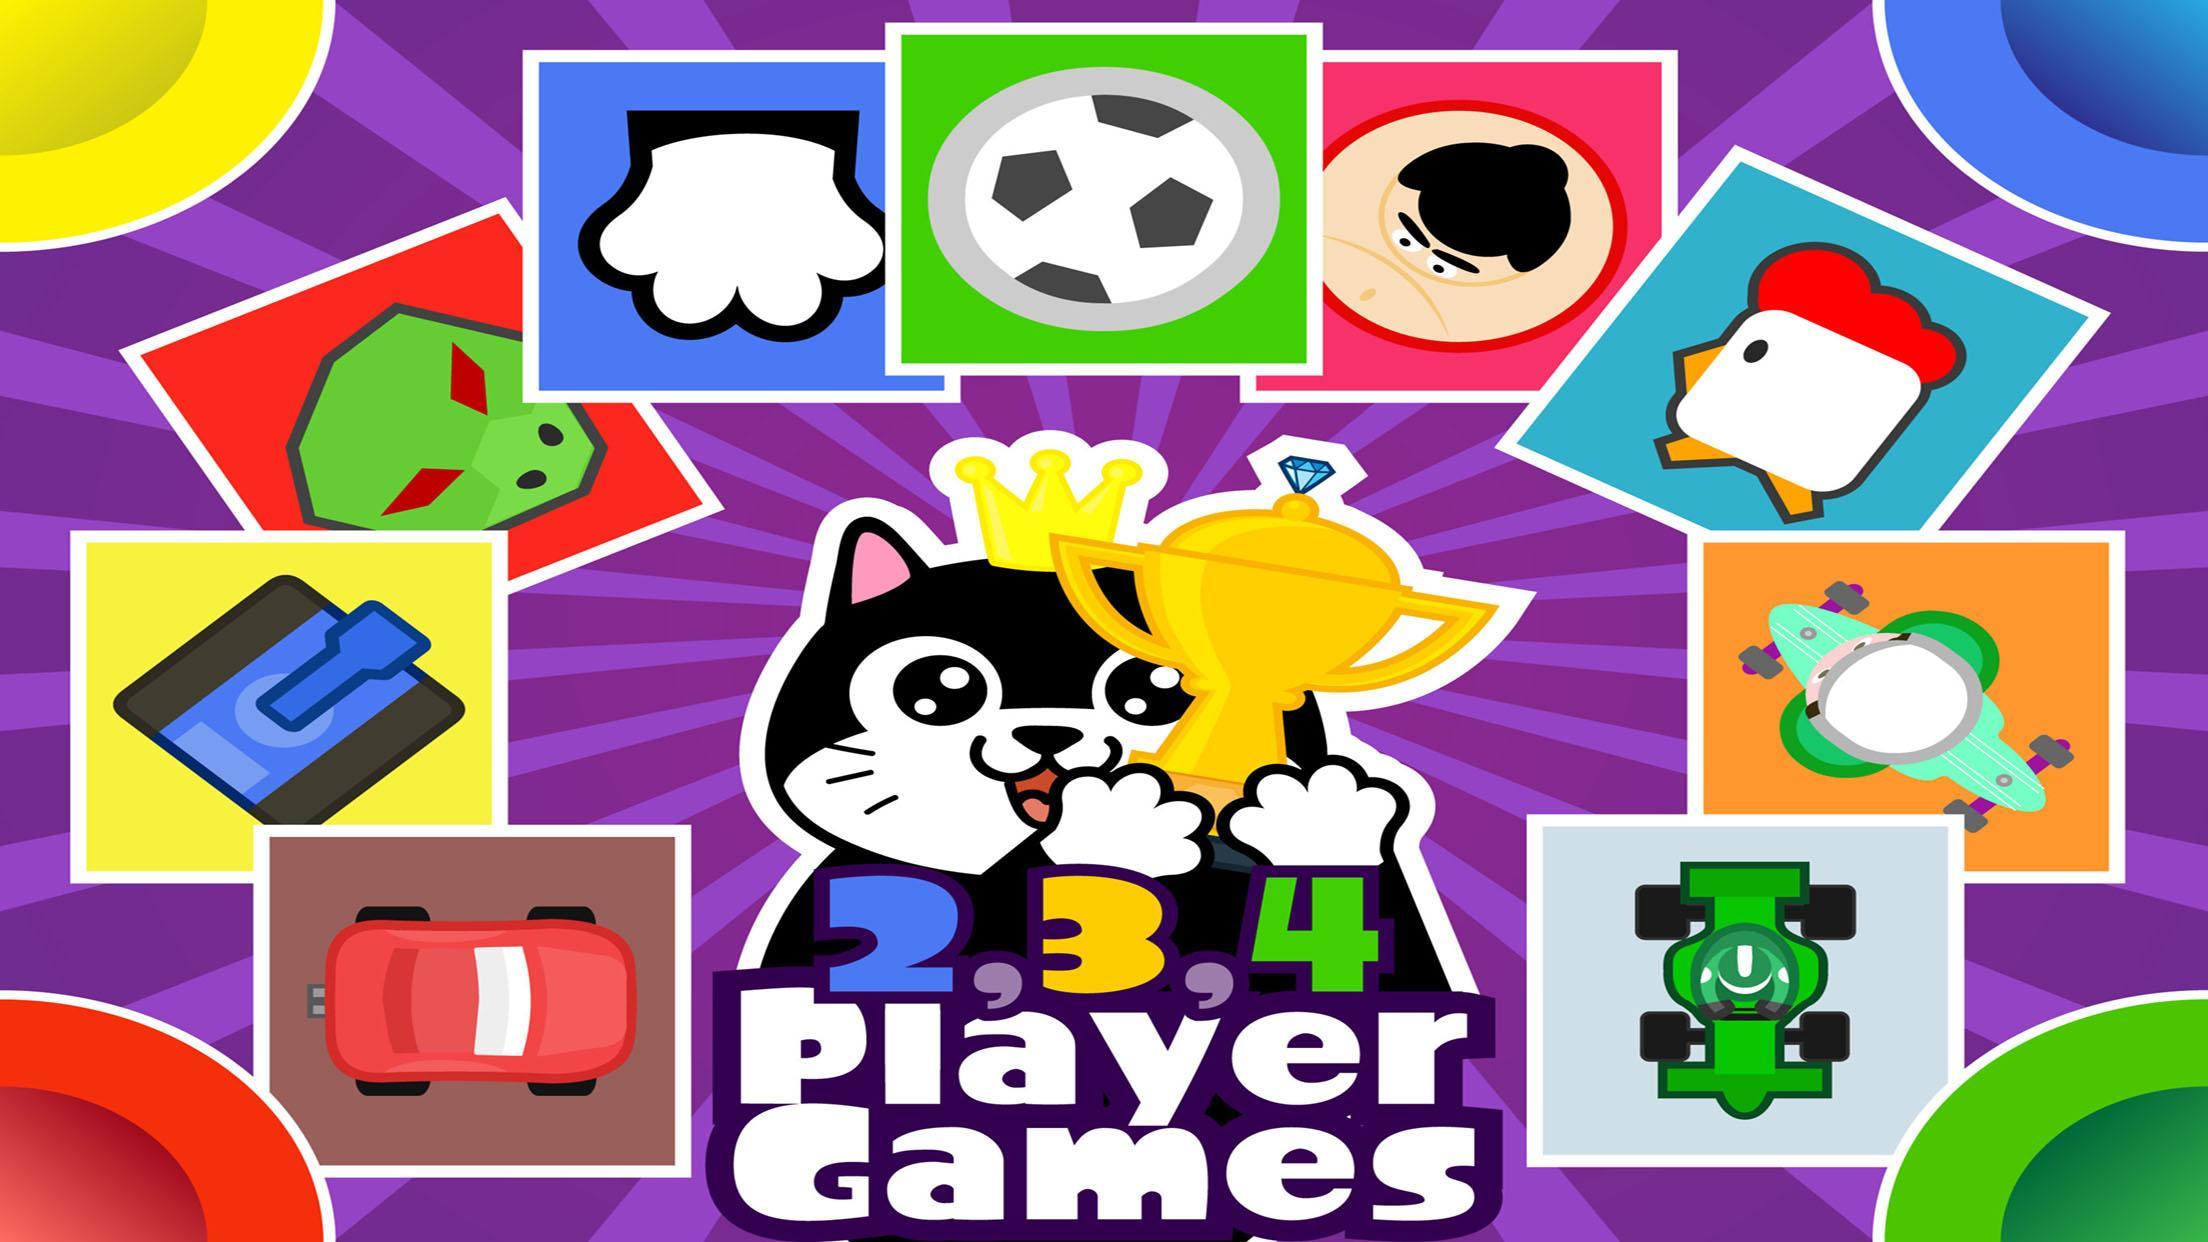 2 3 4 Player Mini Games for Android - APK Download